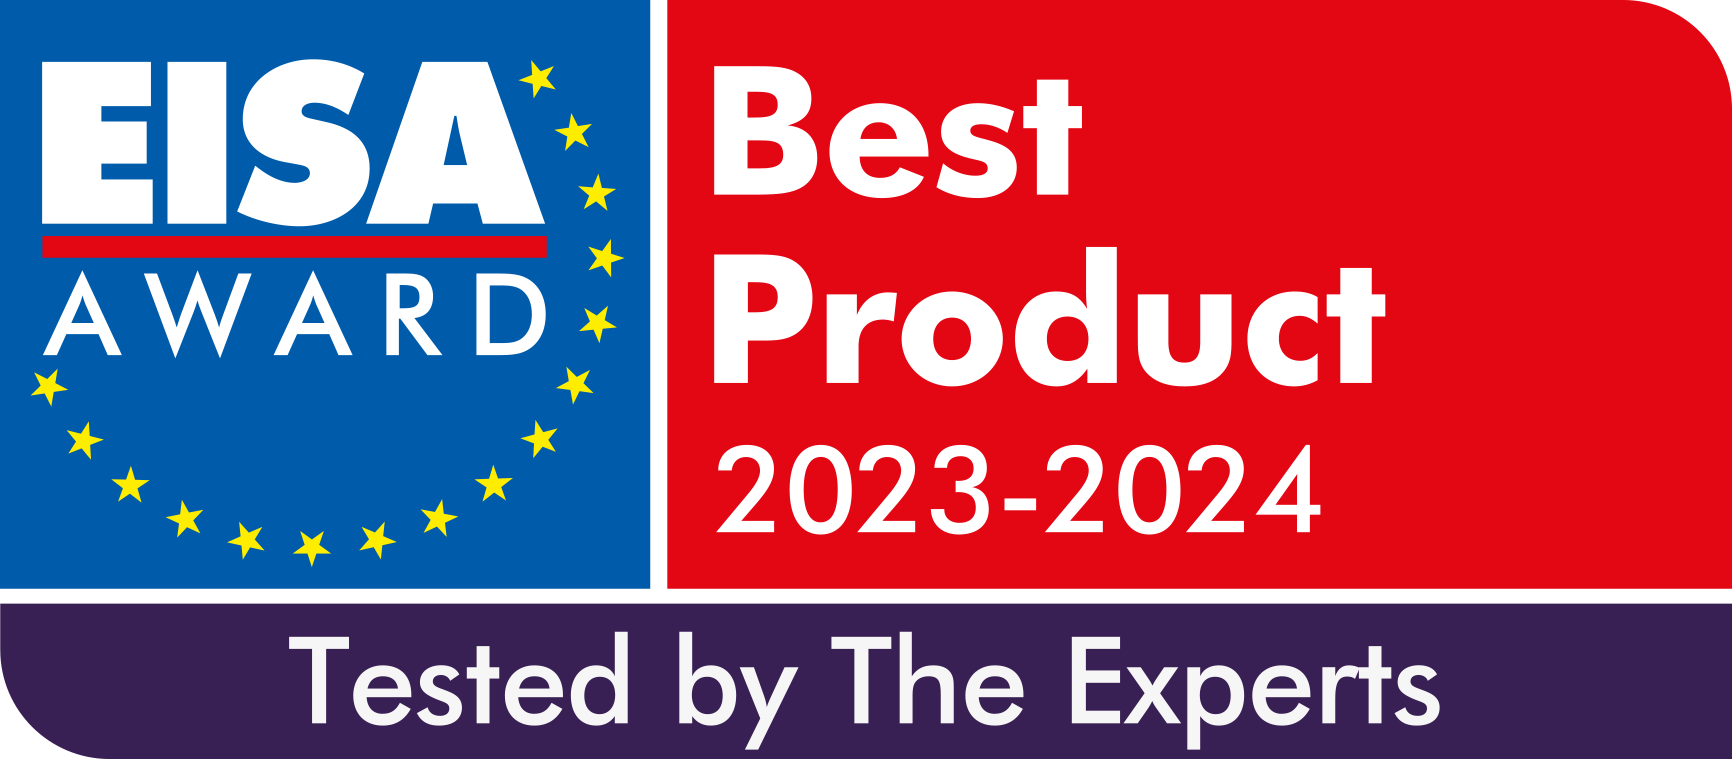 EISA-Award-Logo-2023-2024-Tested-by-the-Experts-outline.png